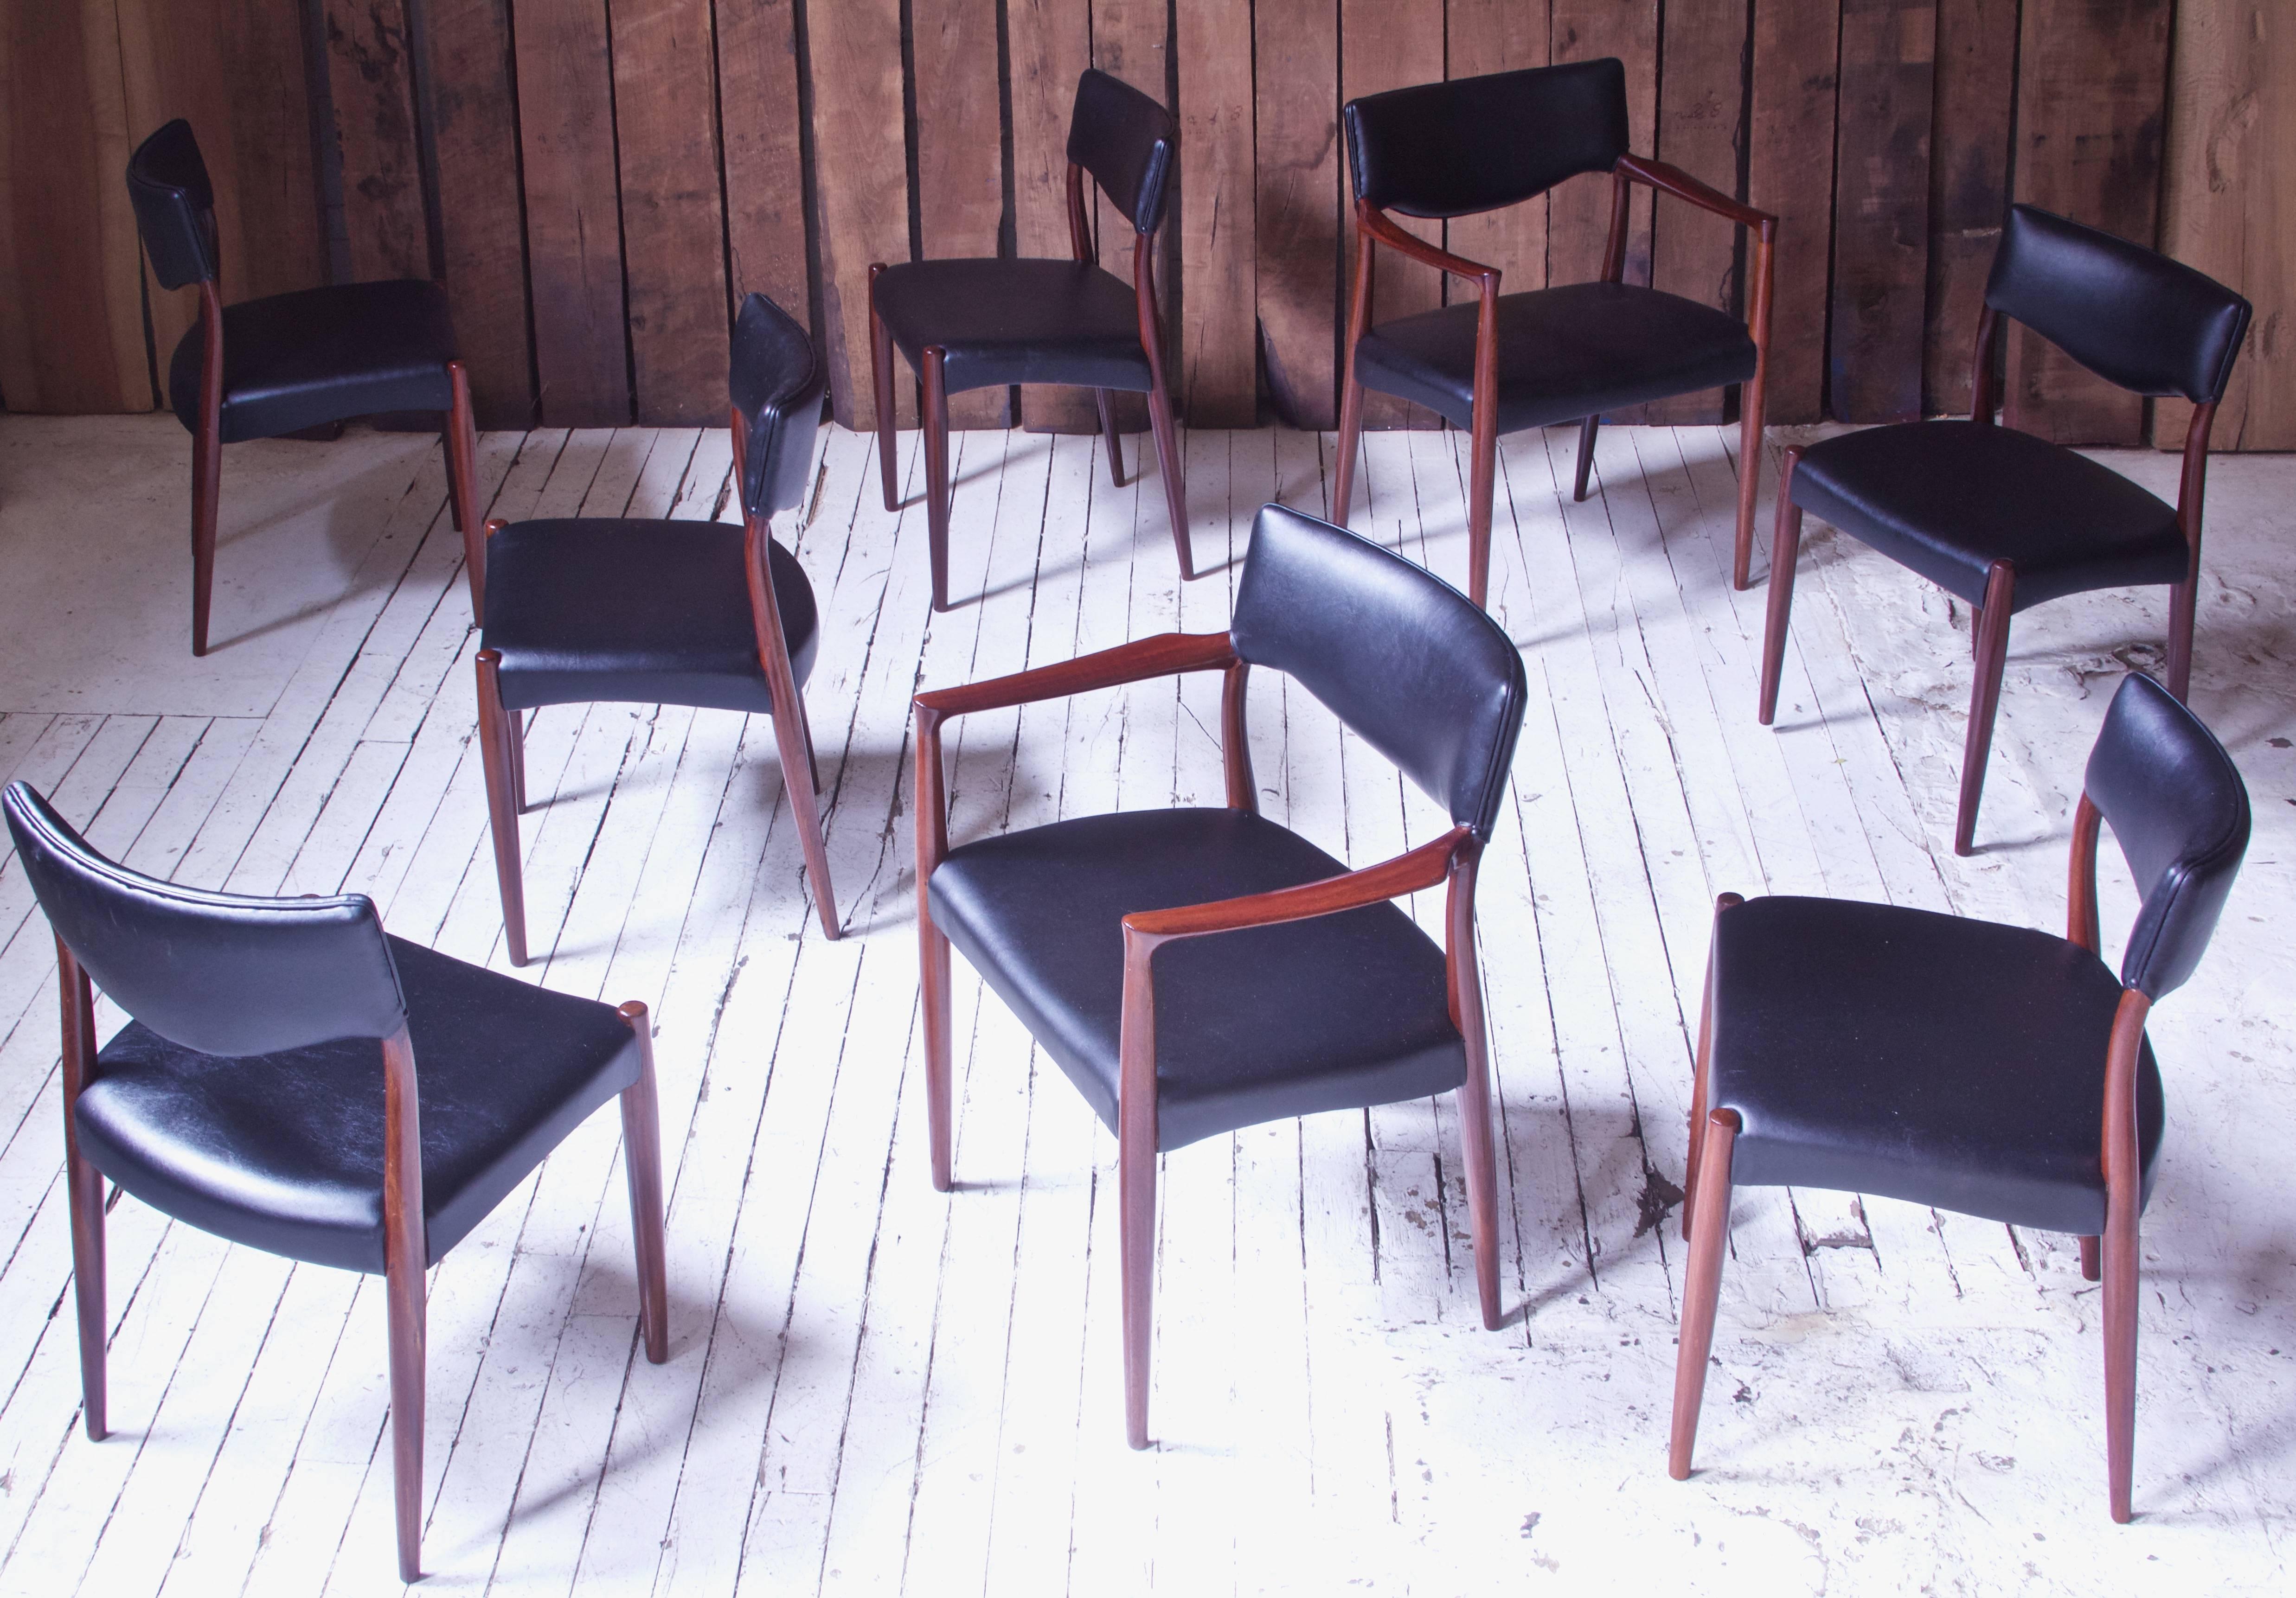 Stunning complete and original set of eight dining chairs, two of which are armchairs, designed by the prolific and multi-talented Danish design duo of Aksel Bender Madsen & Ejner Larsen, 1952; manufactured by Willy Beck. Excellent vintage